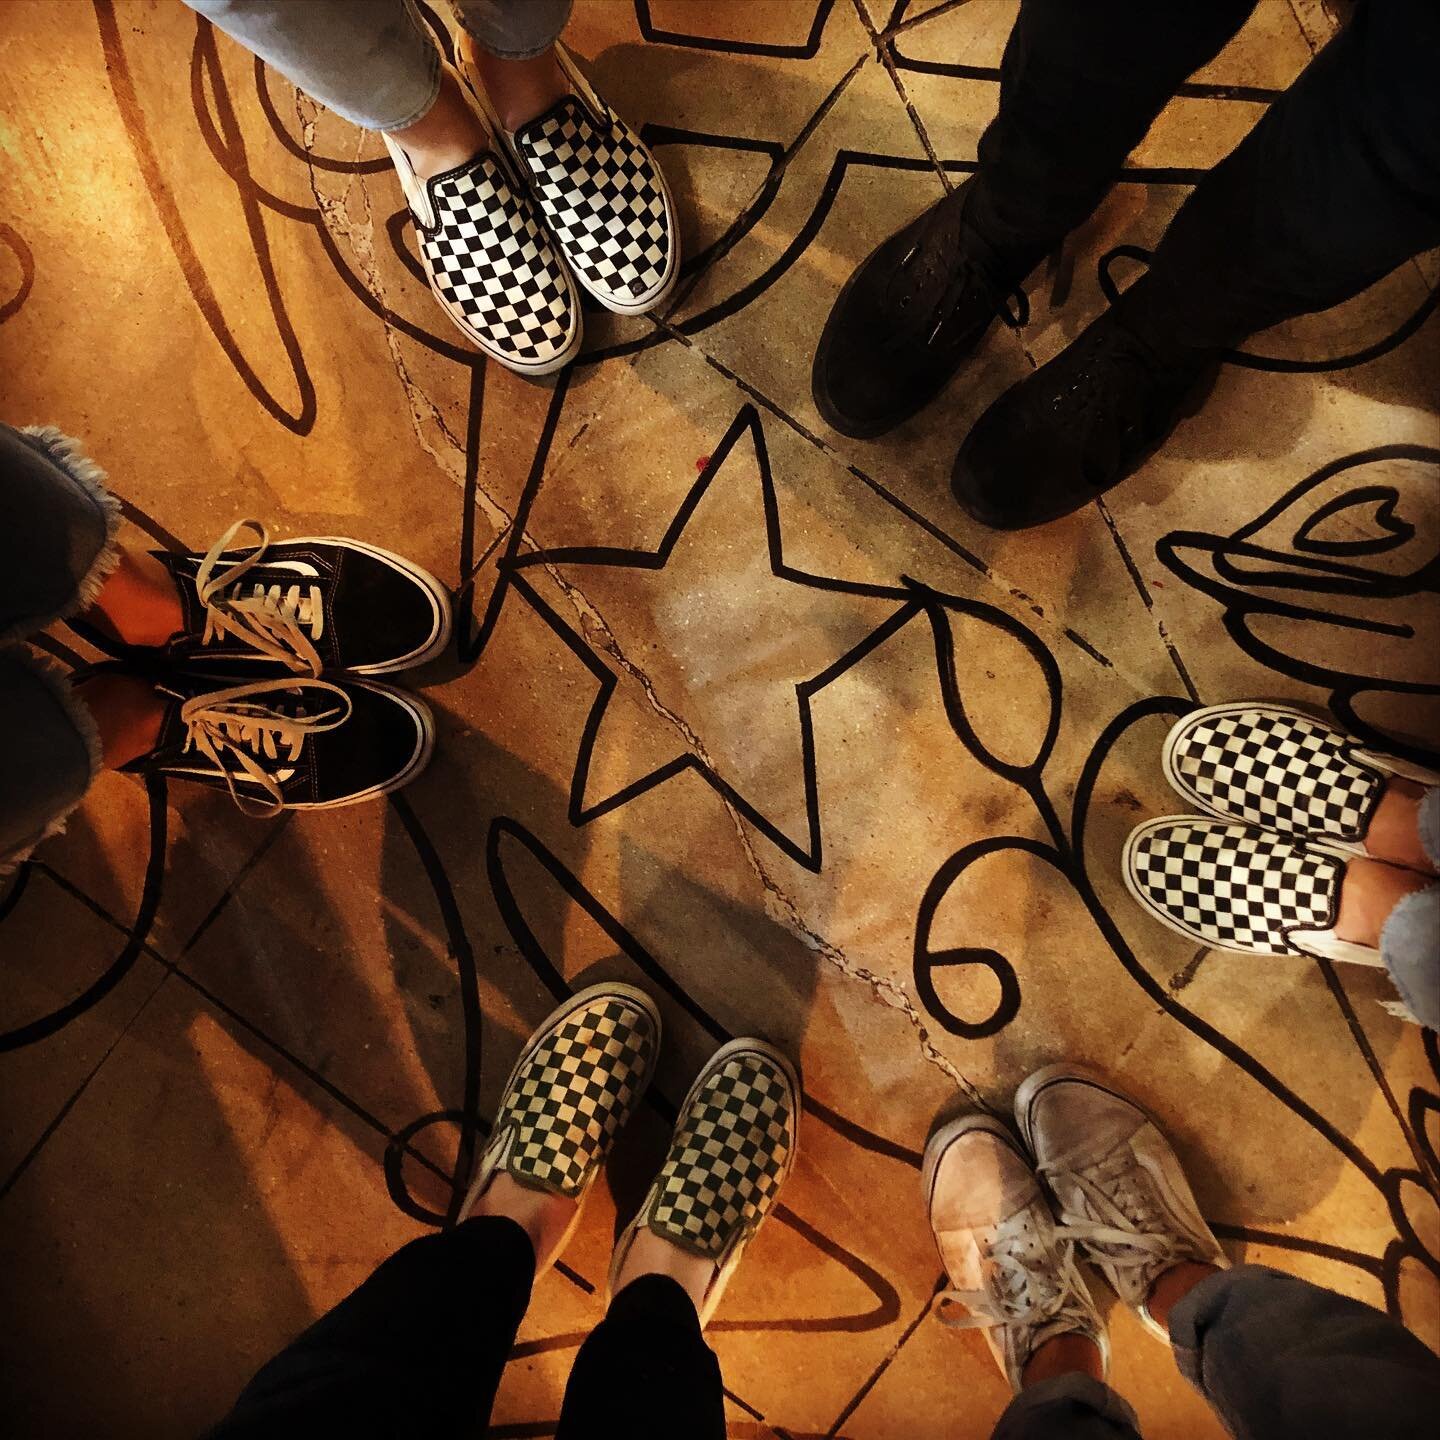 Vans... Original, irreverent, cool and a great American success story.  Not a uniform requirement, but the overwhelming footwear choice of American Pizza Mfg. crew members. We celebrate this iconoclast of style.  Keep disrupting! #vansoffthewall #buy